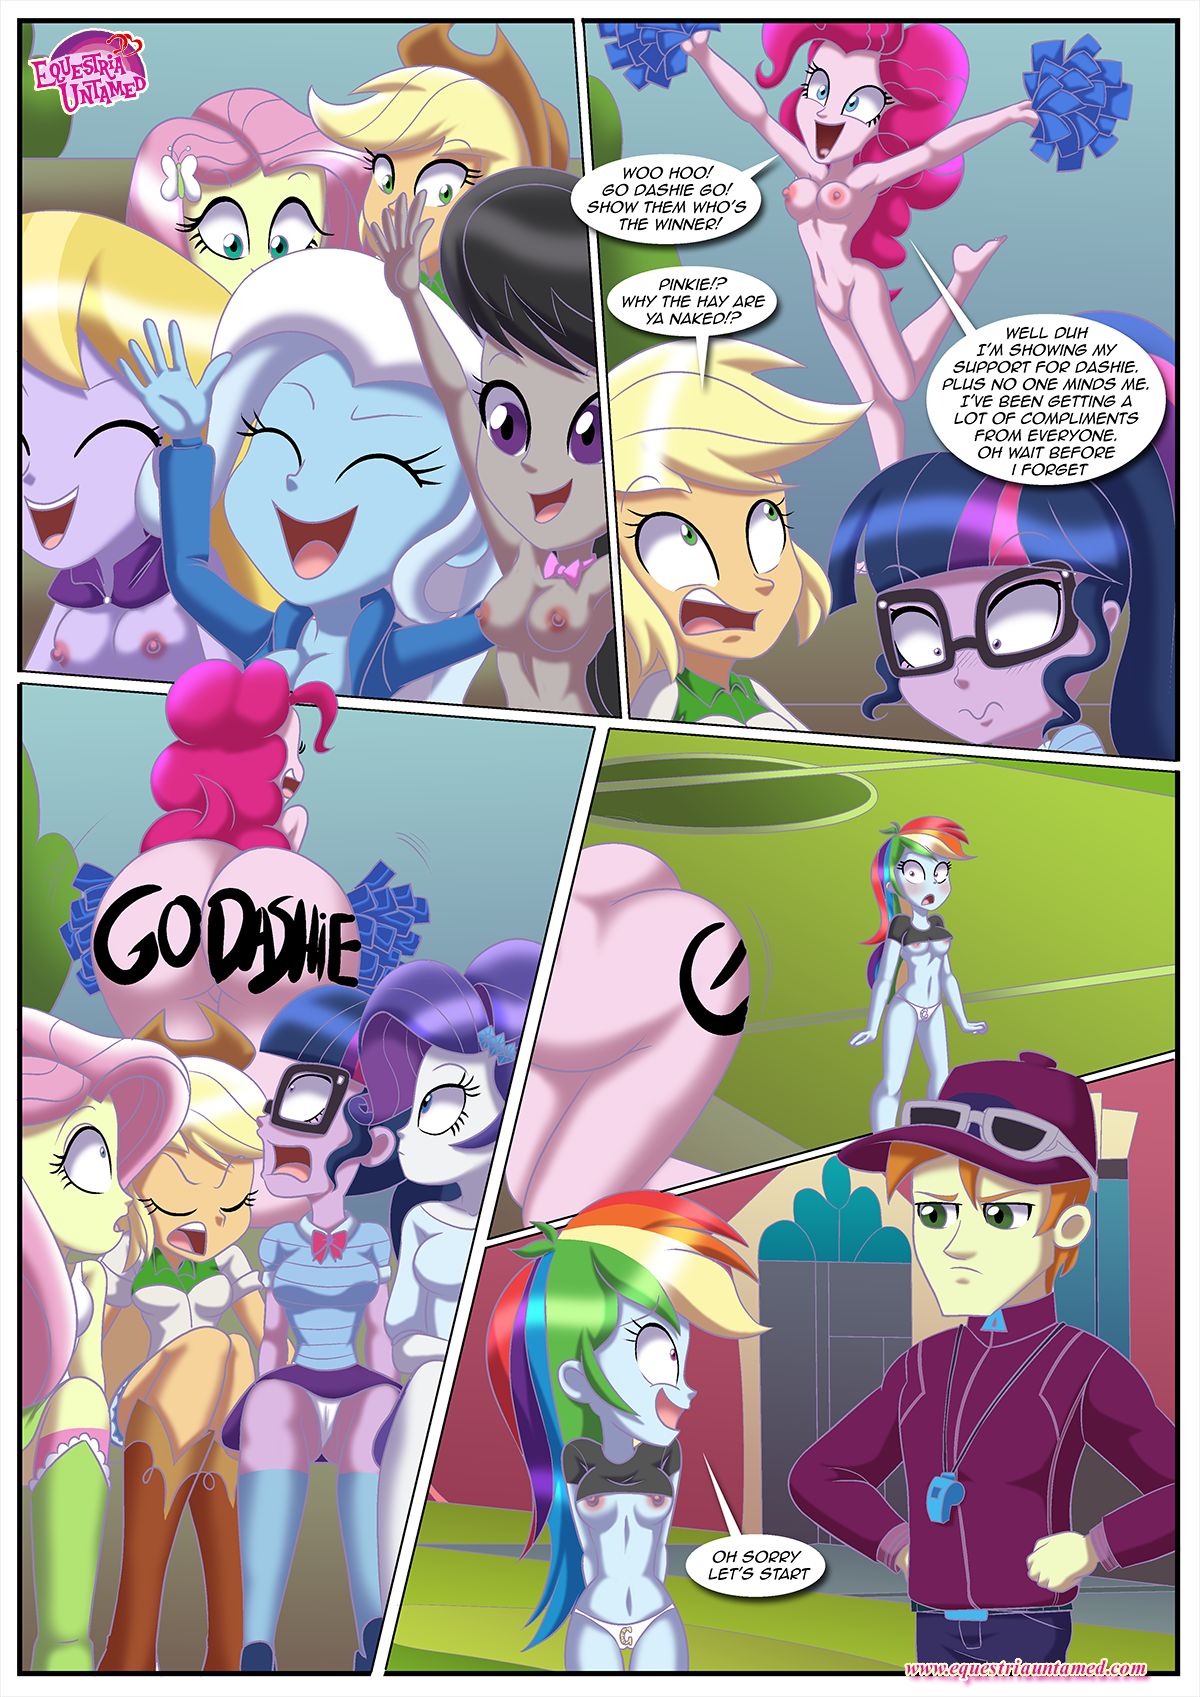 Naked My Little Pony Porn - Sex Reeducation - My Little Pony: Friendship is Magic by Palcomix -  TeenSpiritHentai